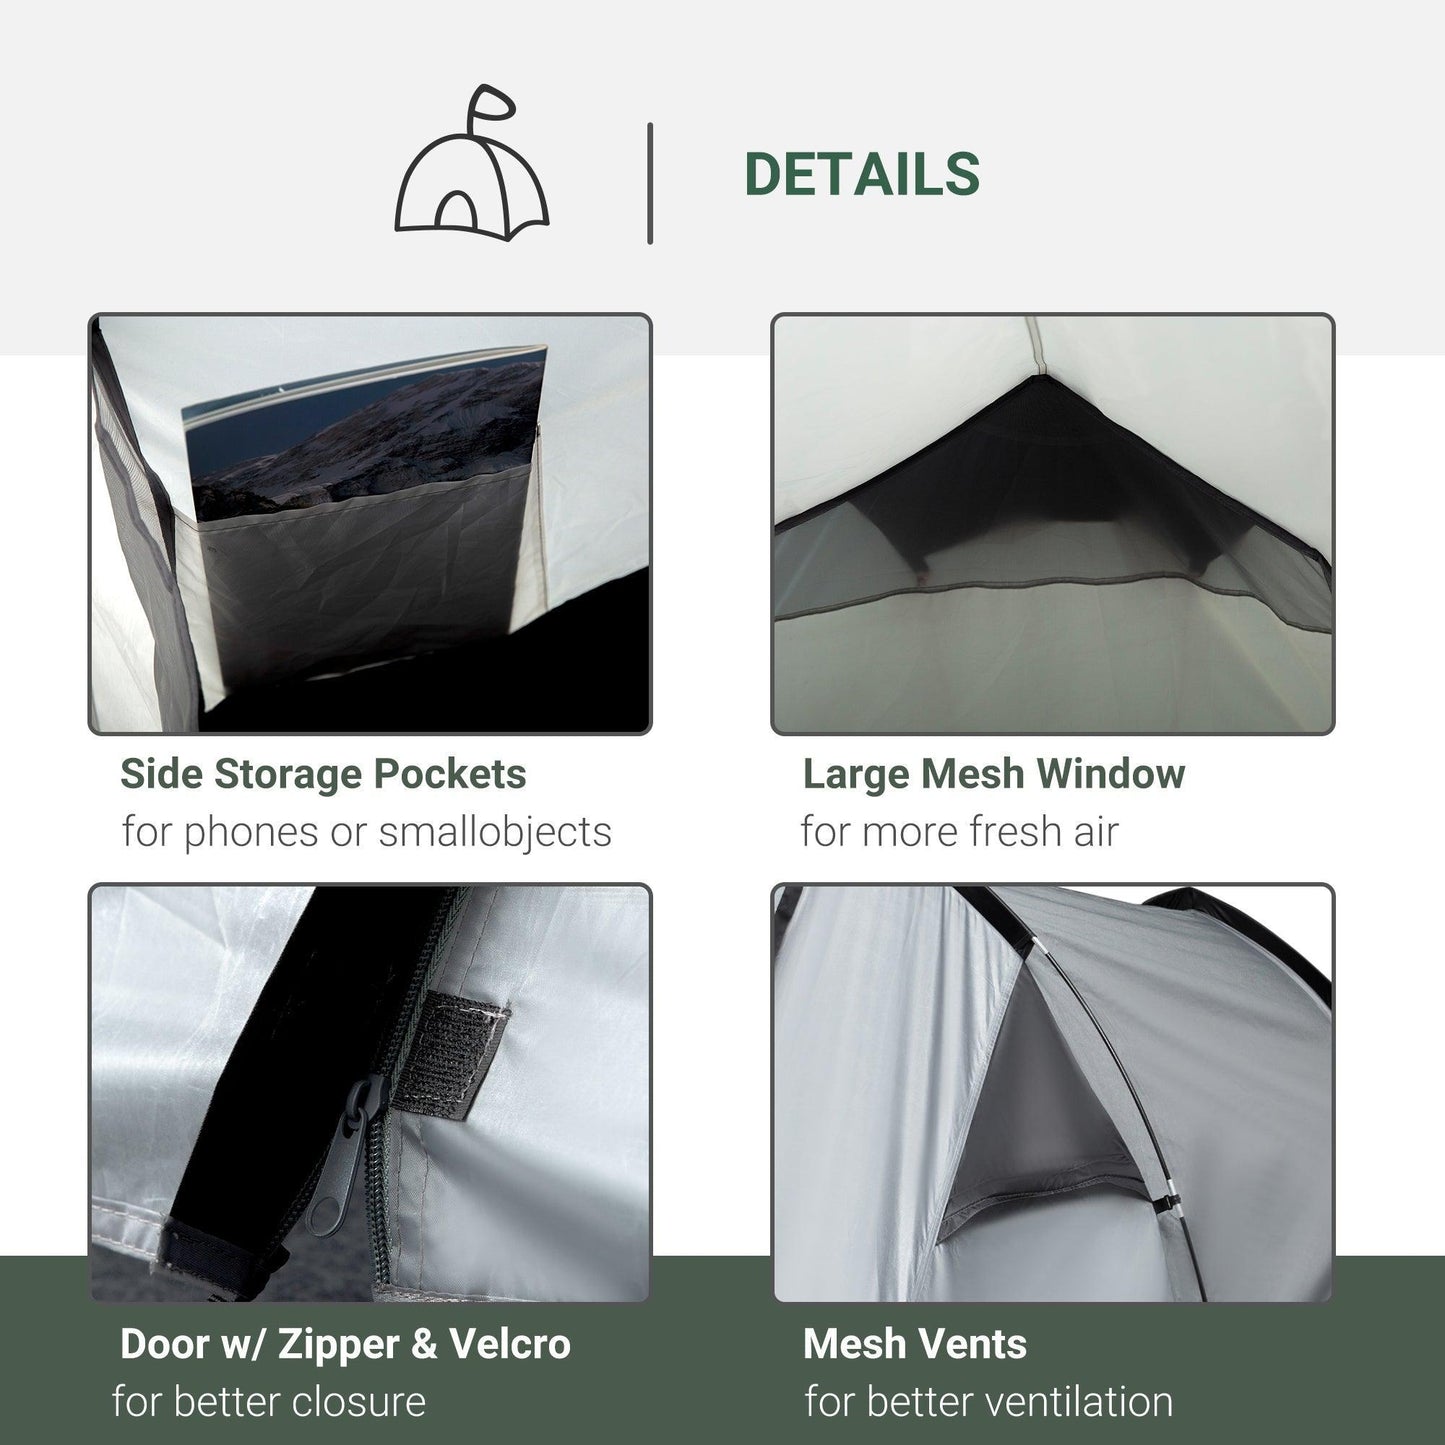 Outsunny Lightweight Double Layer Camping Tent - Perfect for 2 People - ALL4U RETAILER LTD